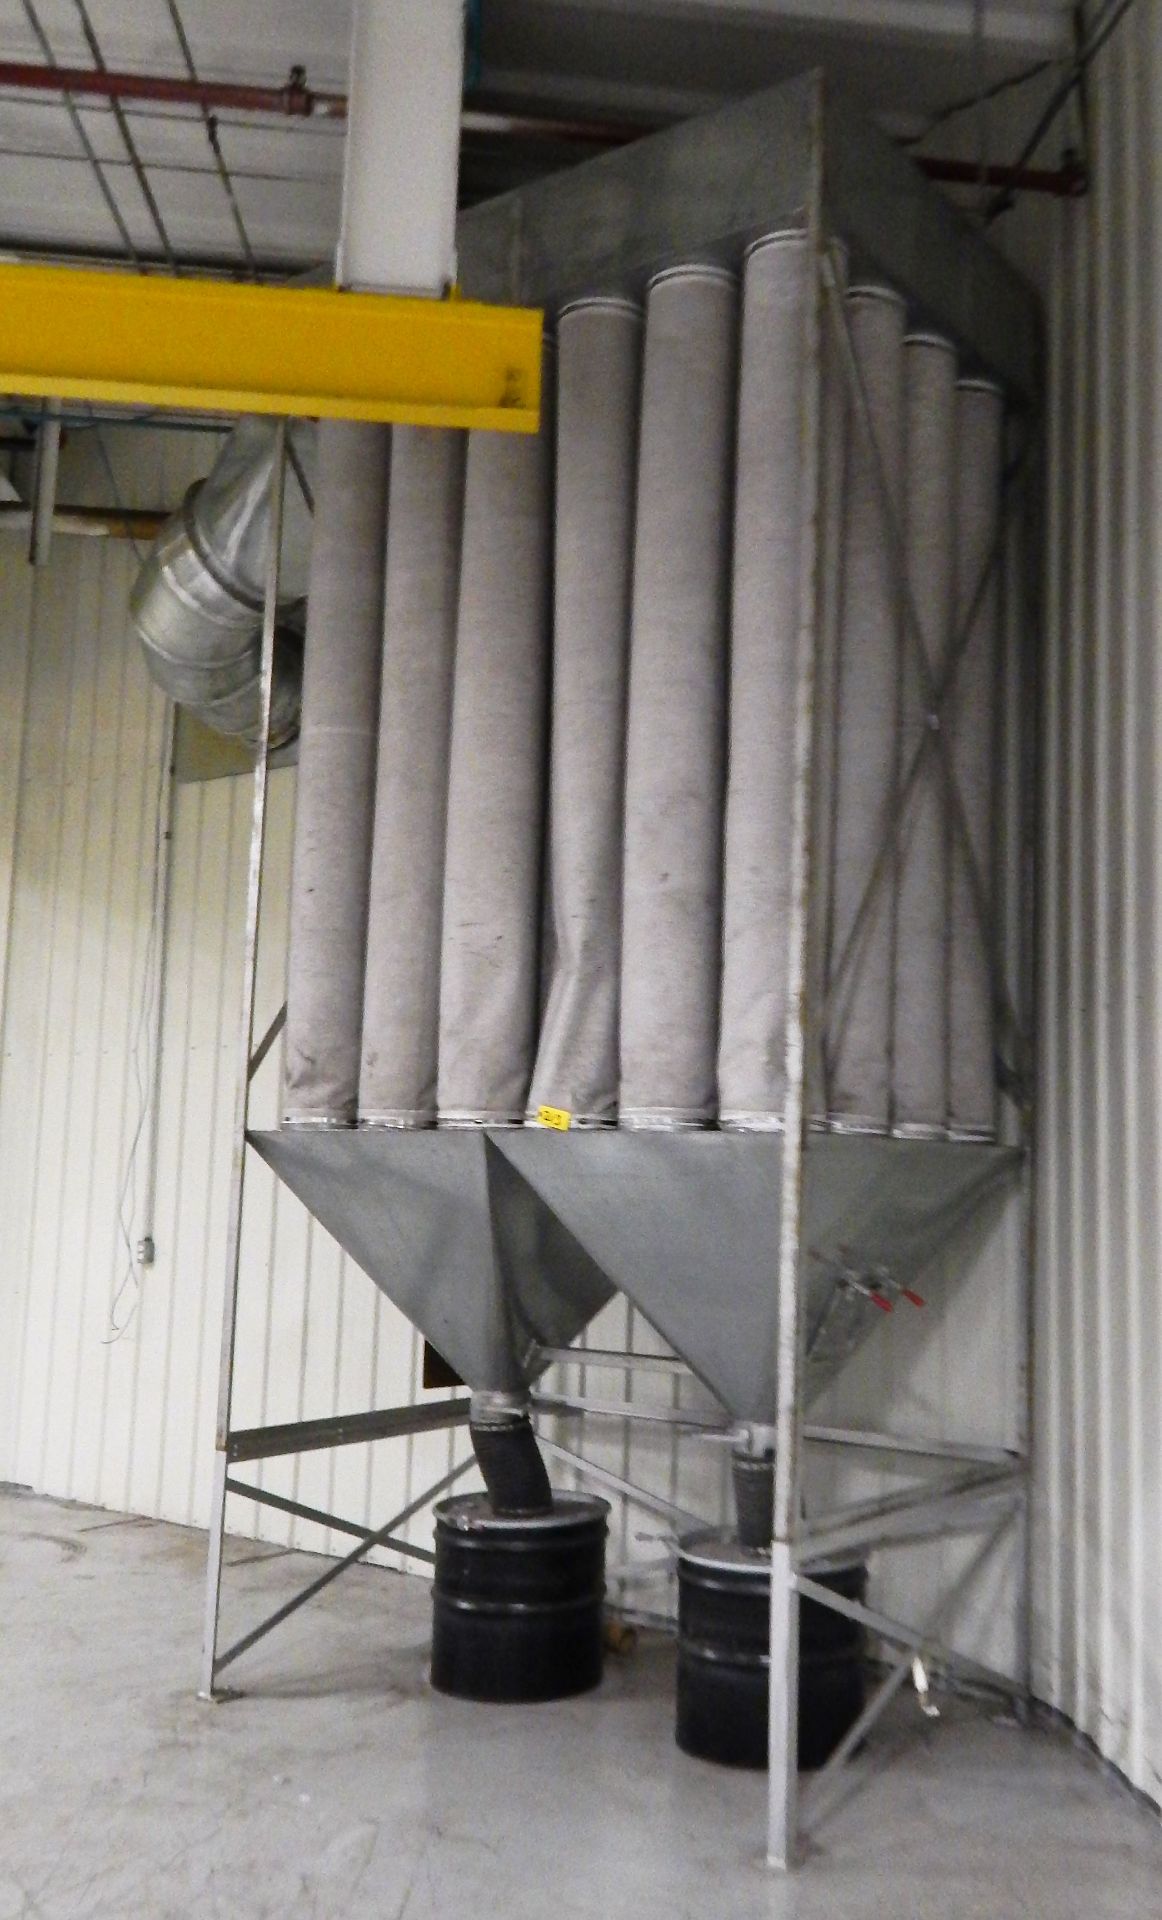 24-BAG DUST COLLECTION SYSTEM